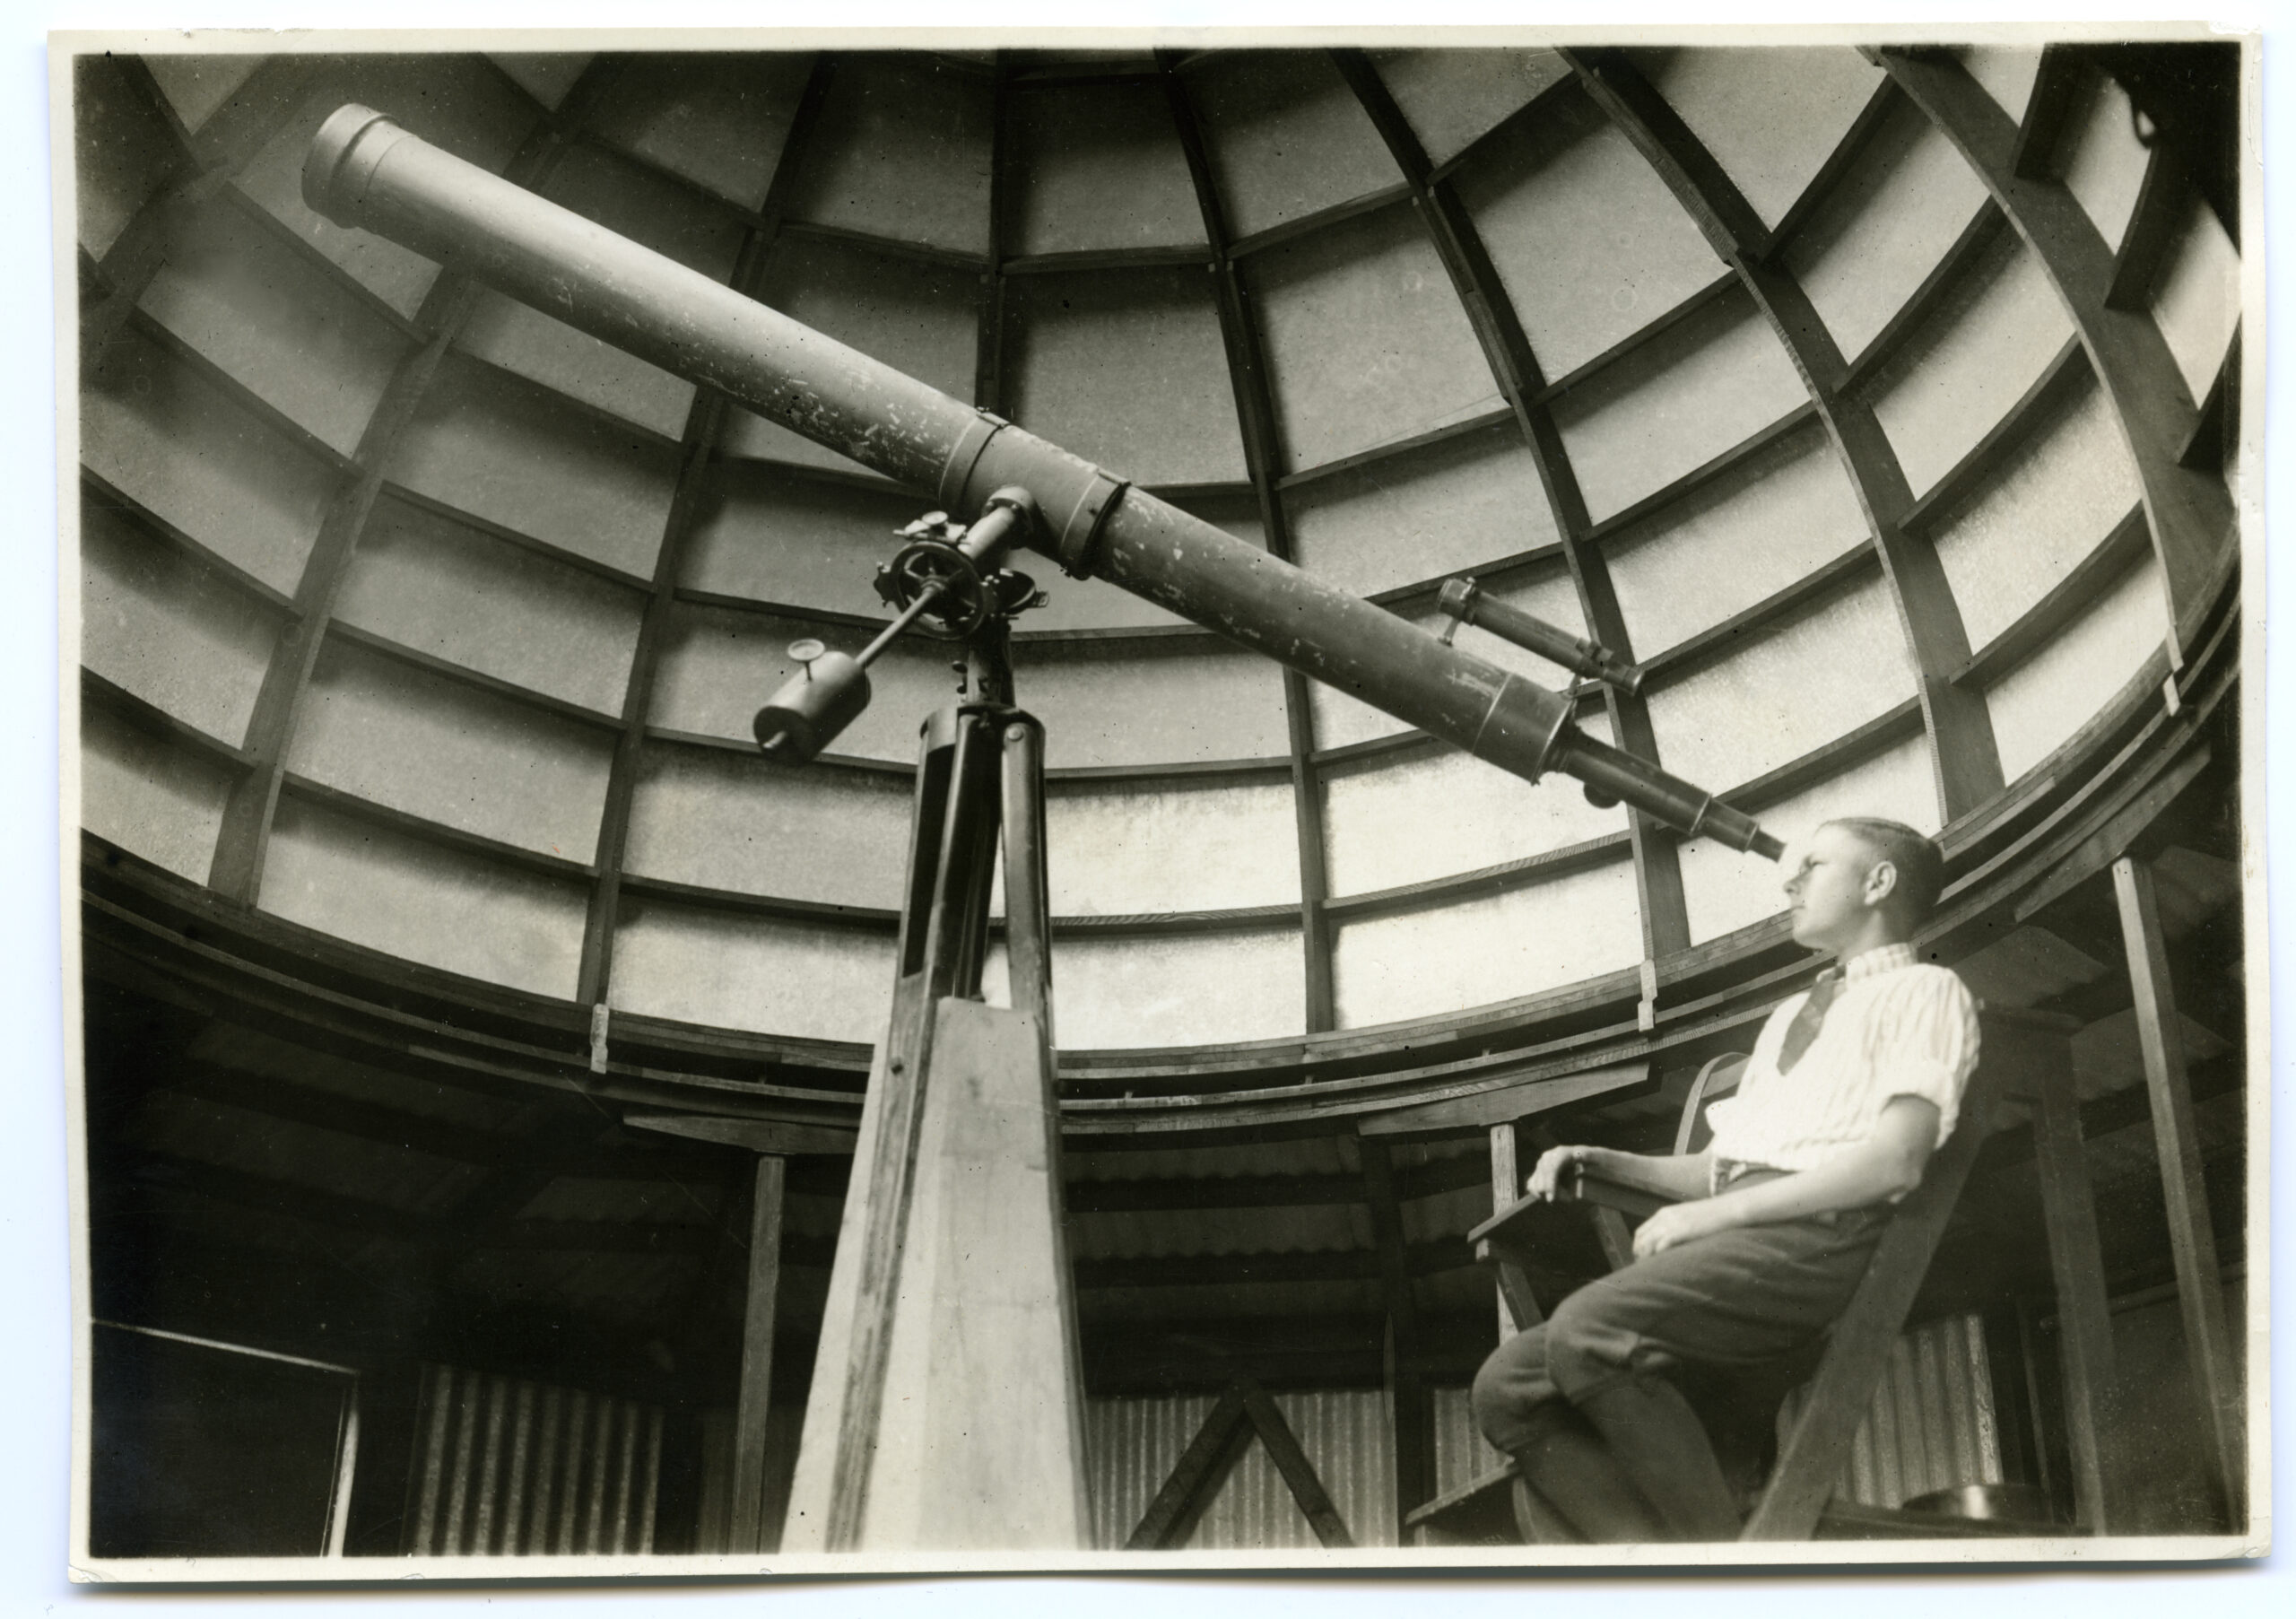 A young man looks through a telescope in a domed building, greyscale